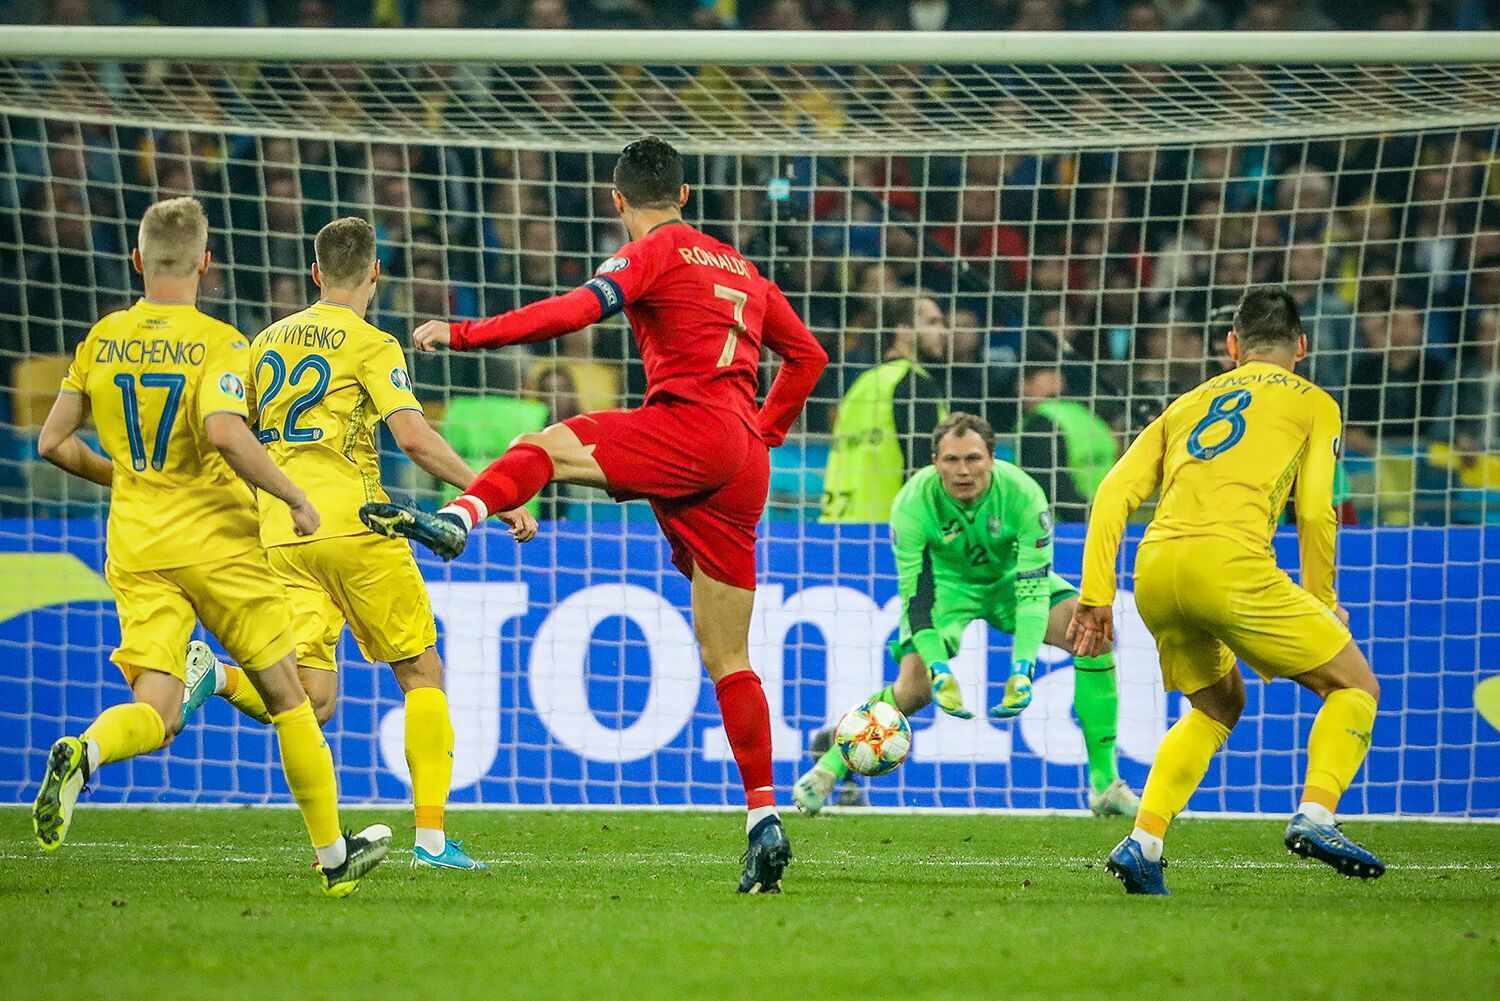 Putting a spoke in the wheel or providing a reward: how the Ukrainian national team played against the winners of the Golden Ball